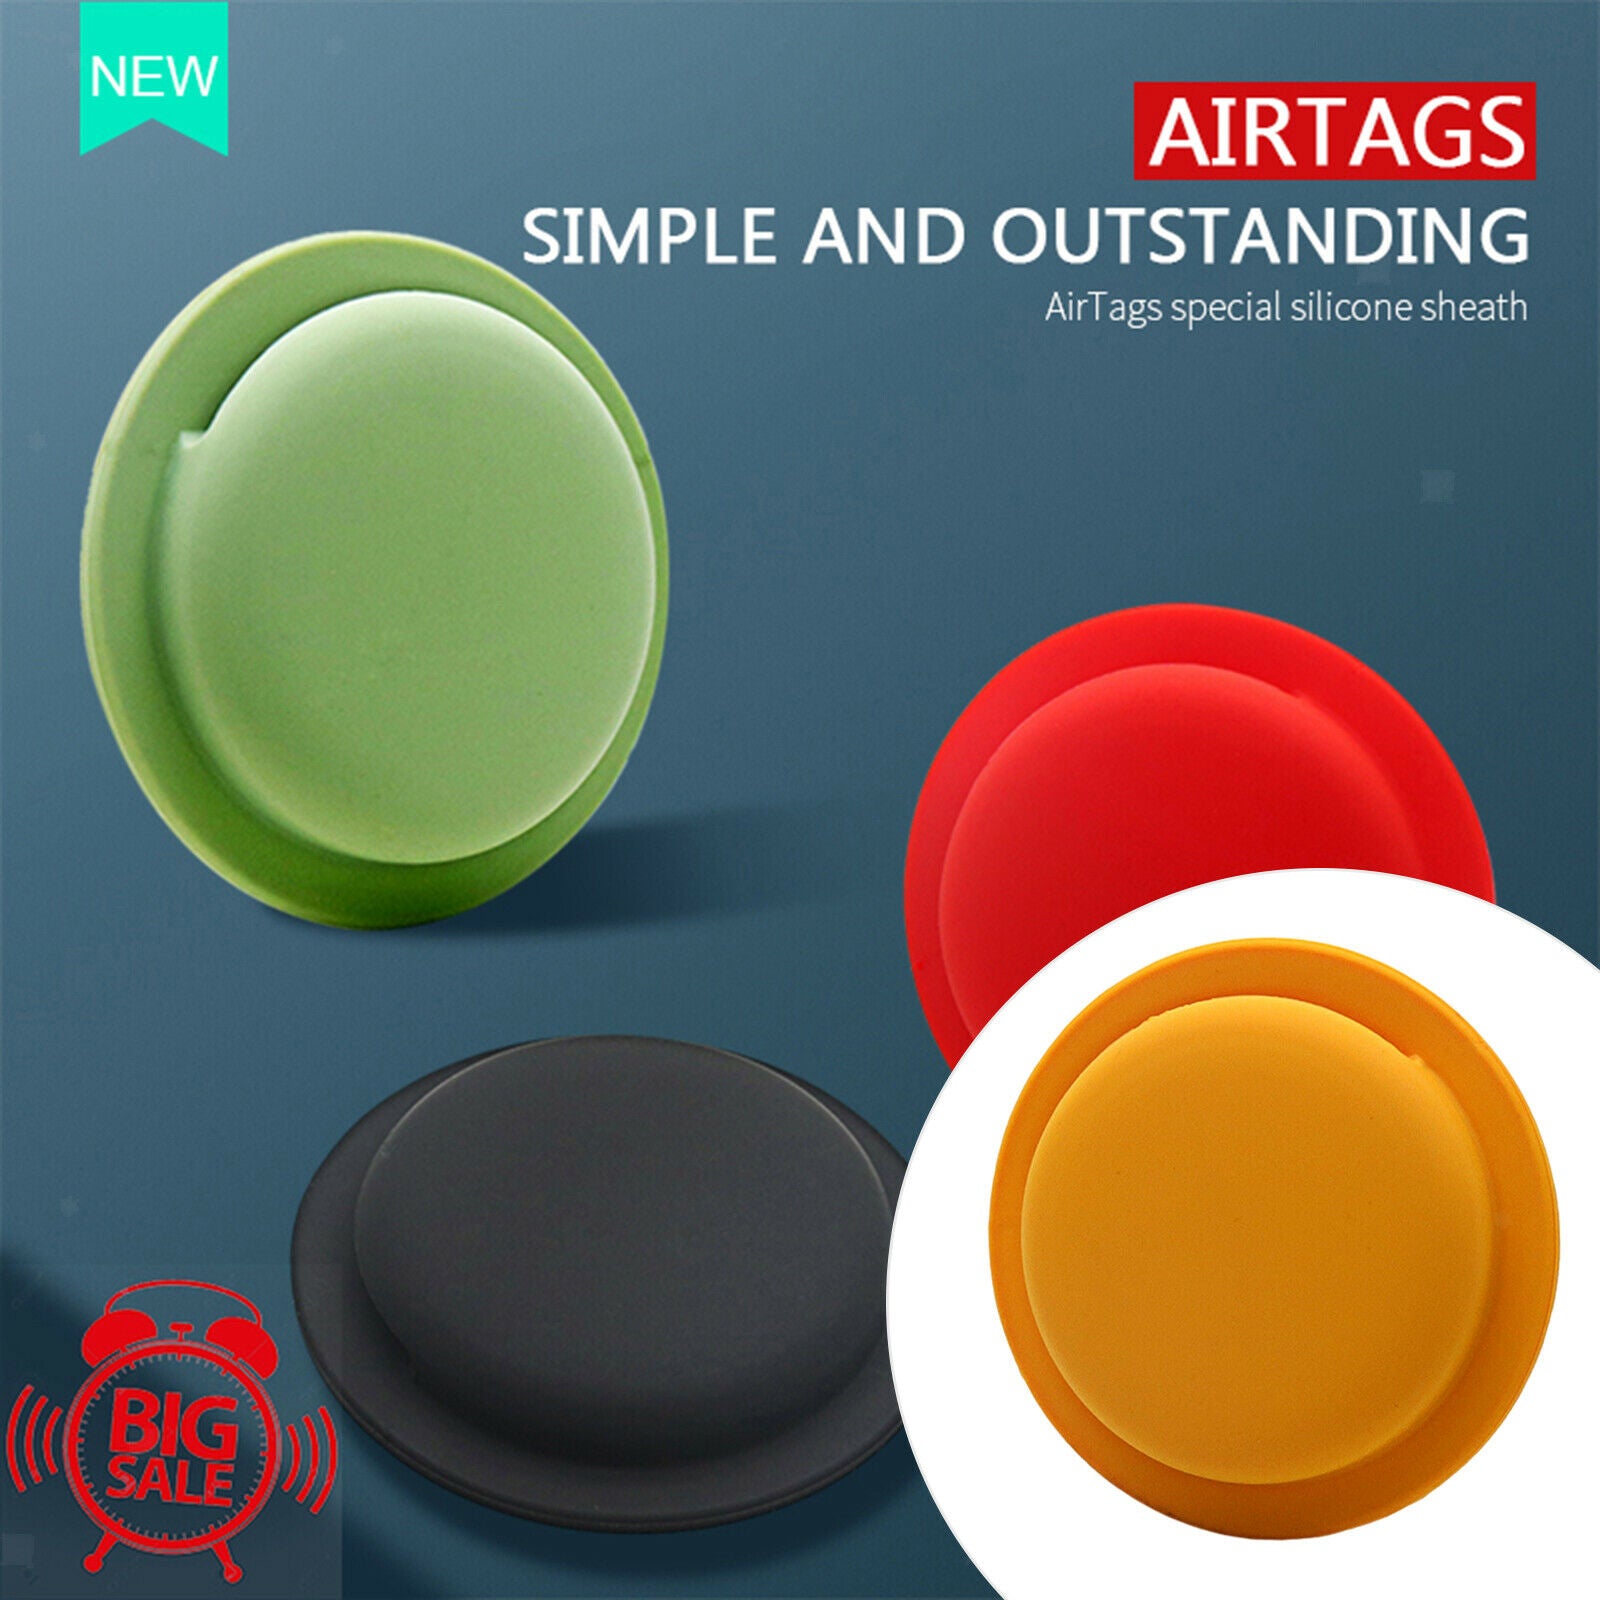 Lightweight Anti-Scratch Silicone Case Protective Sleeve For AirTag Orange